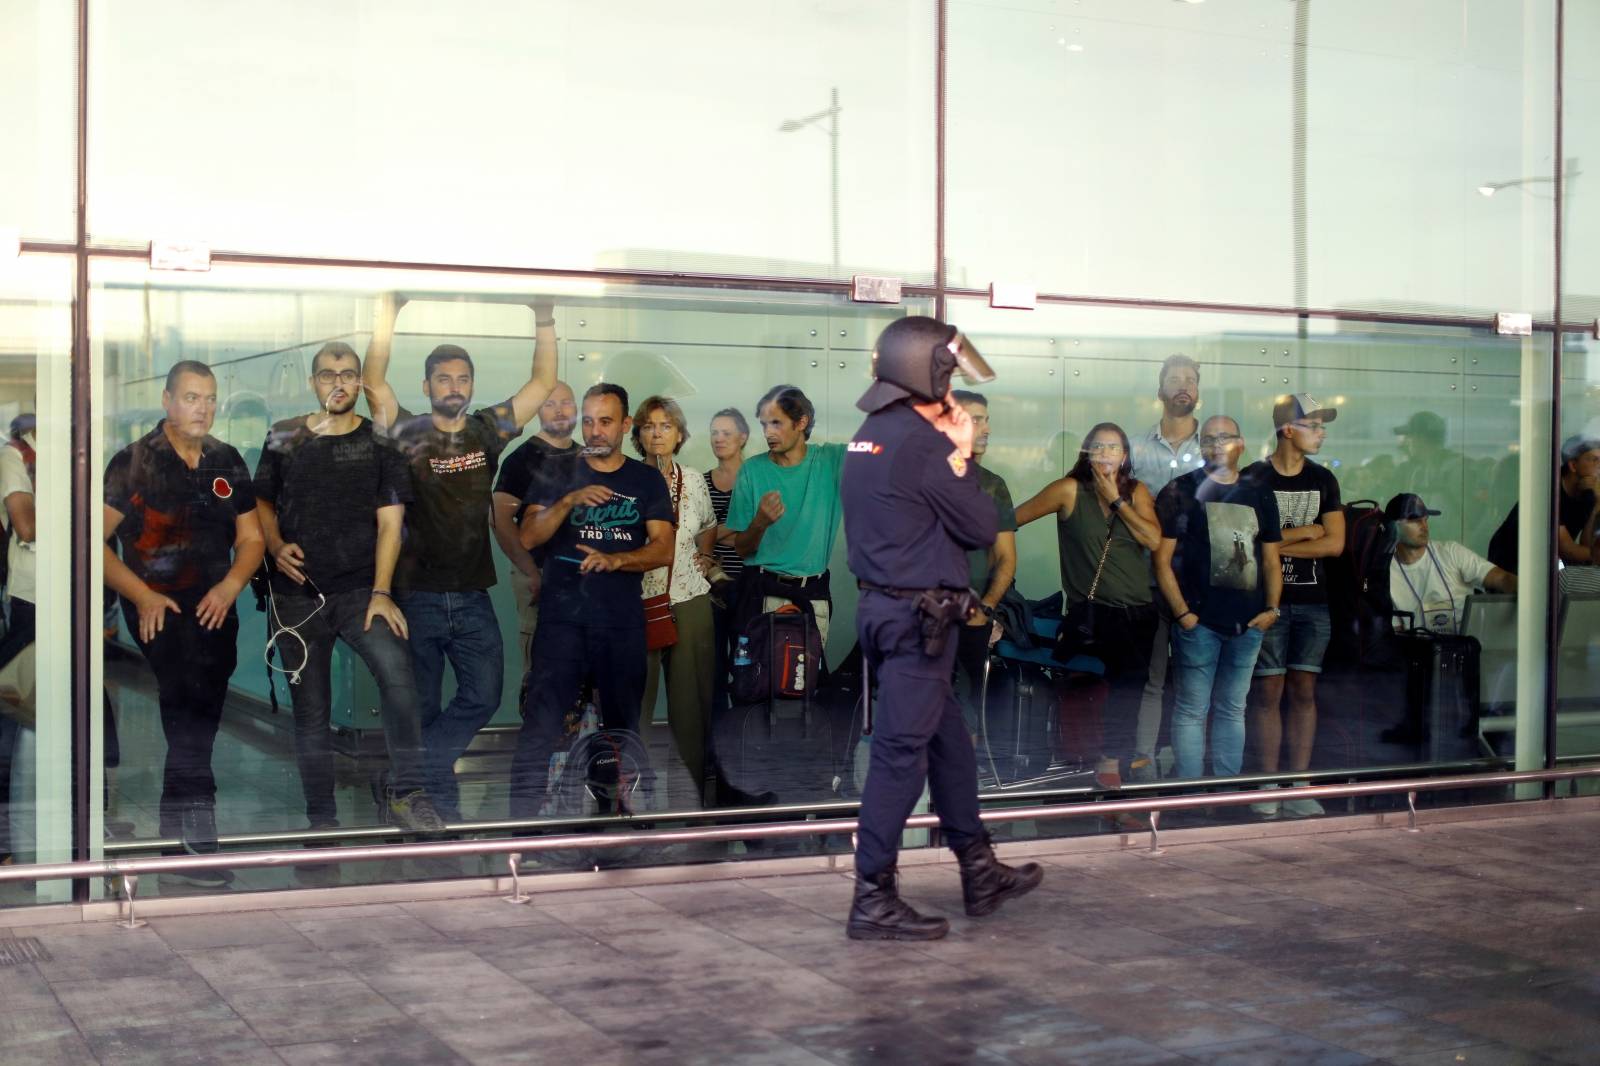 Passengers look as a police officer walks past at Barcelona's airport, during a protest after a verdict in a trial over a banned independence referendum